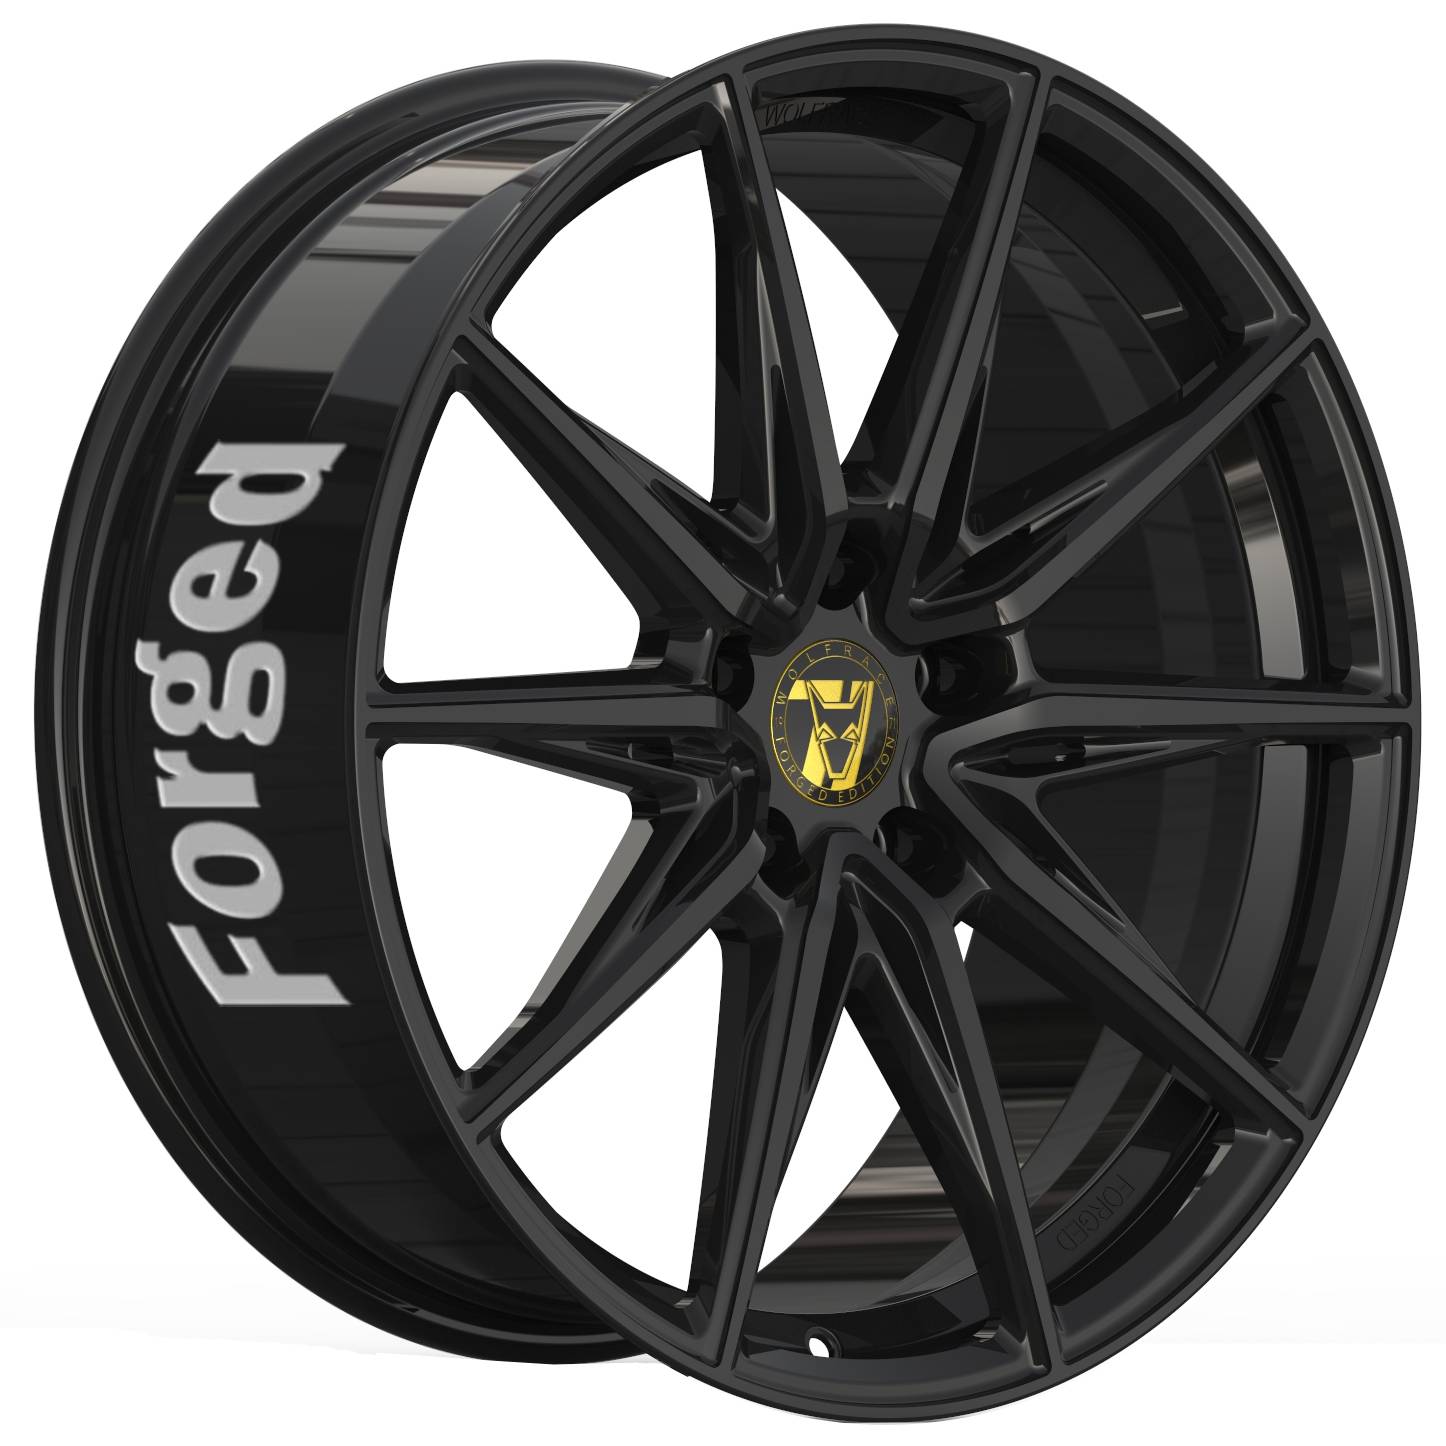 Jantes alu Demon Wheels 71 Forged Edition Urban Racer Forged [8.5x20] -5x114.3- ET 35